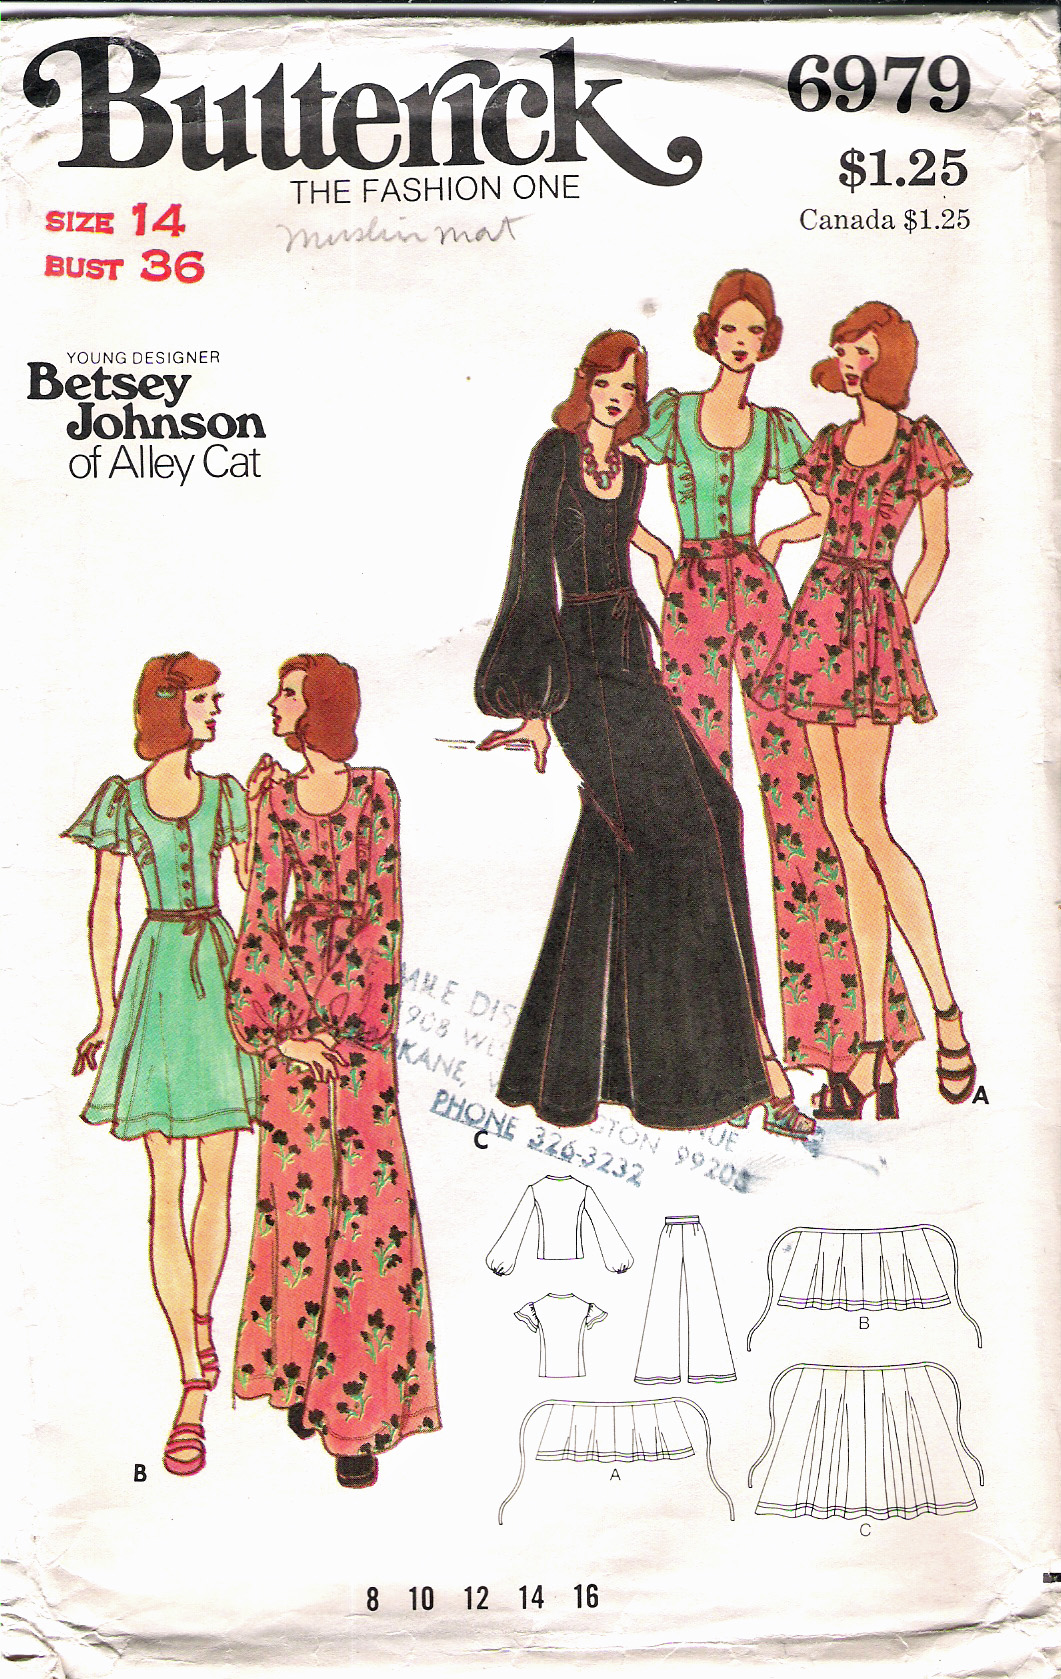 Butterick 6979 | Vintage Sewing Patterns | FANDOM powered by Wikia